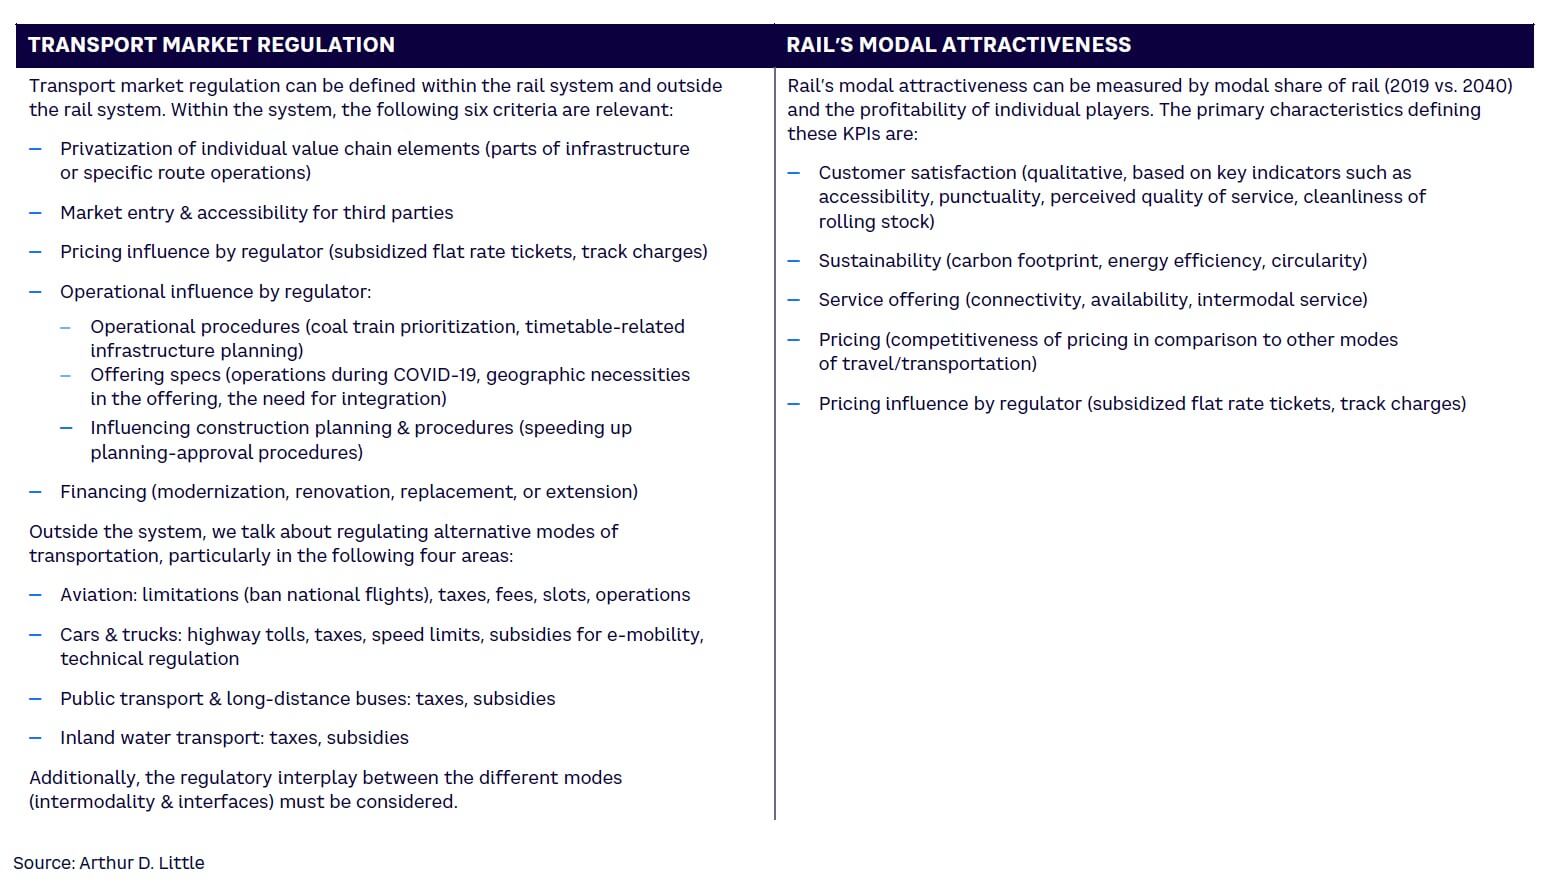 Table 2. Sub-criteria for transport market regulation and rail’s modal attractiveness